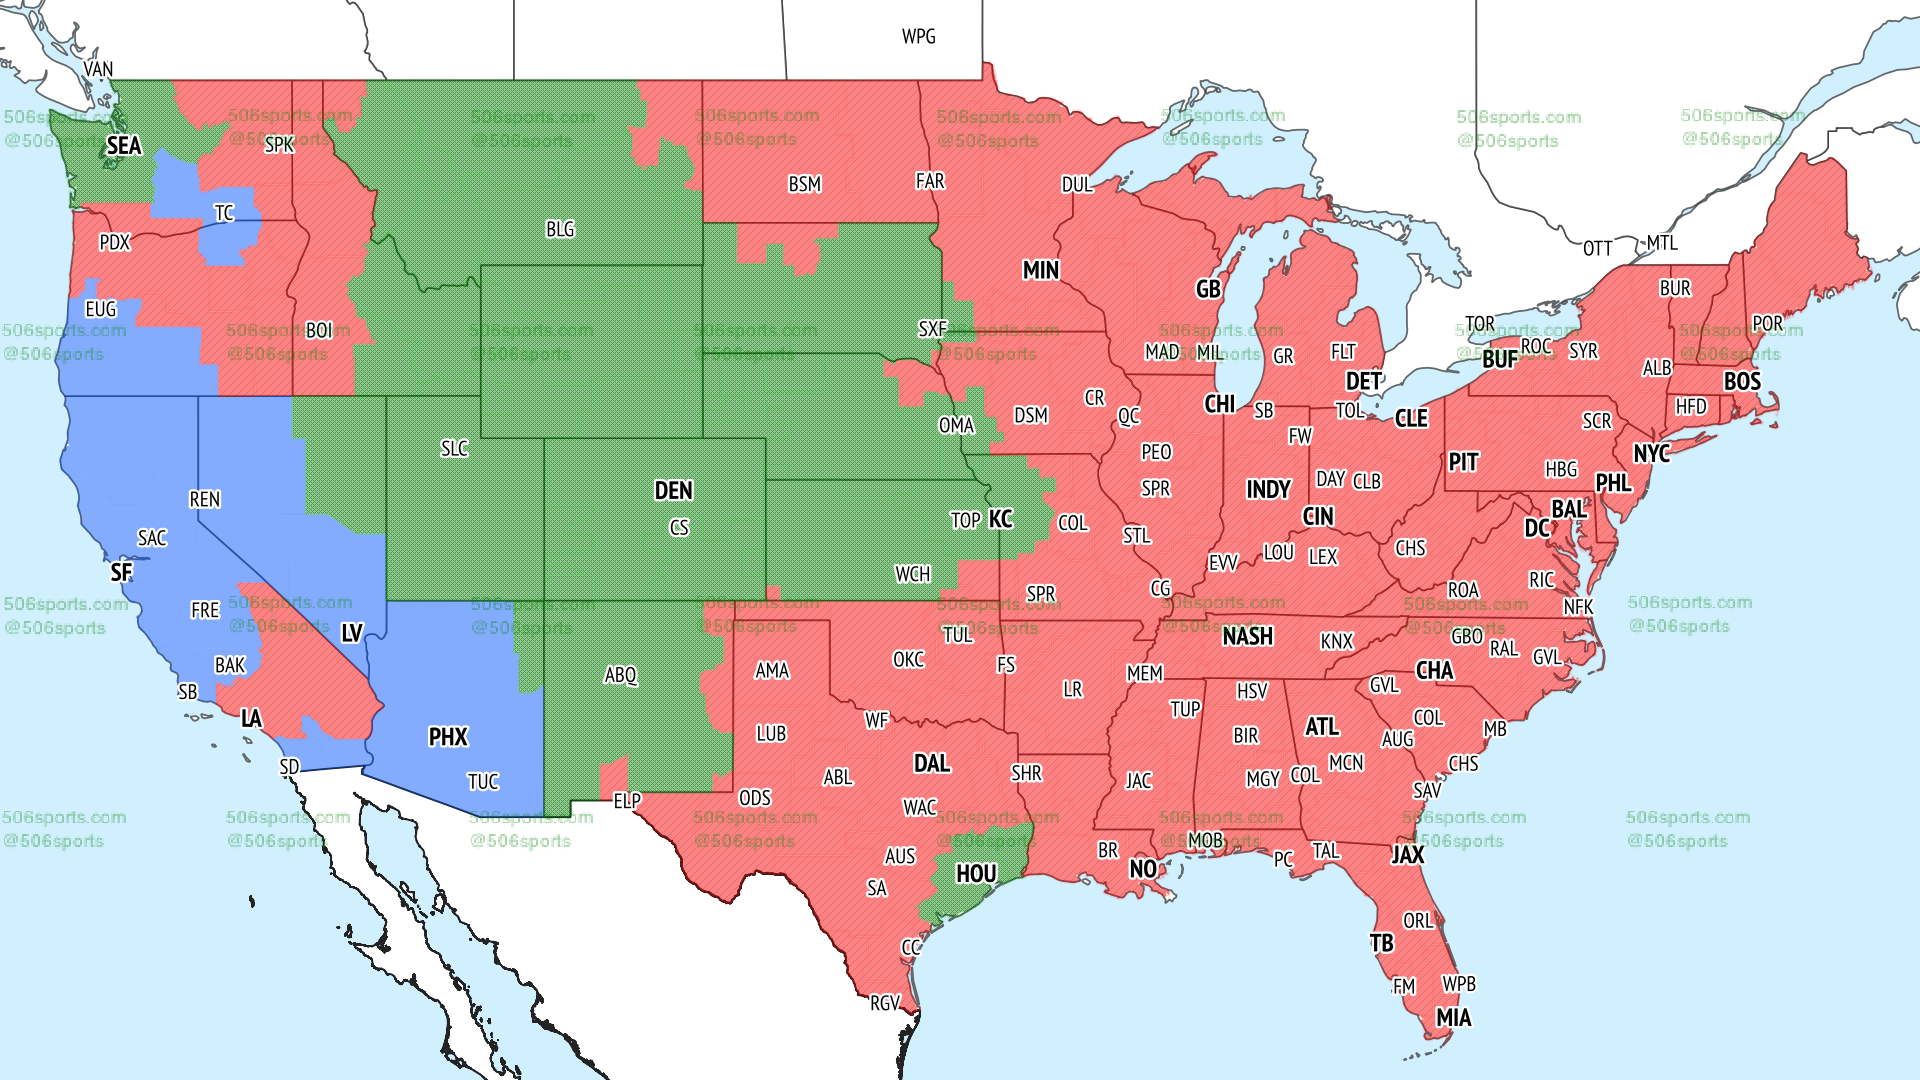 NFL coverage map of late CBS games in Week 2